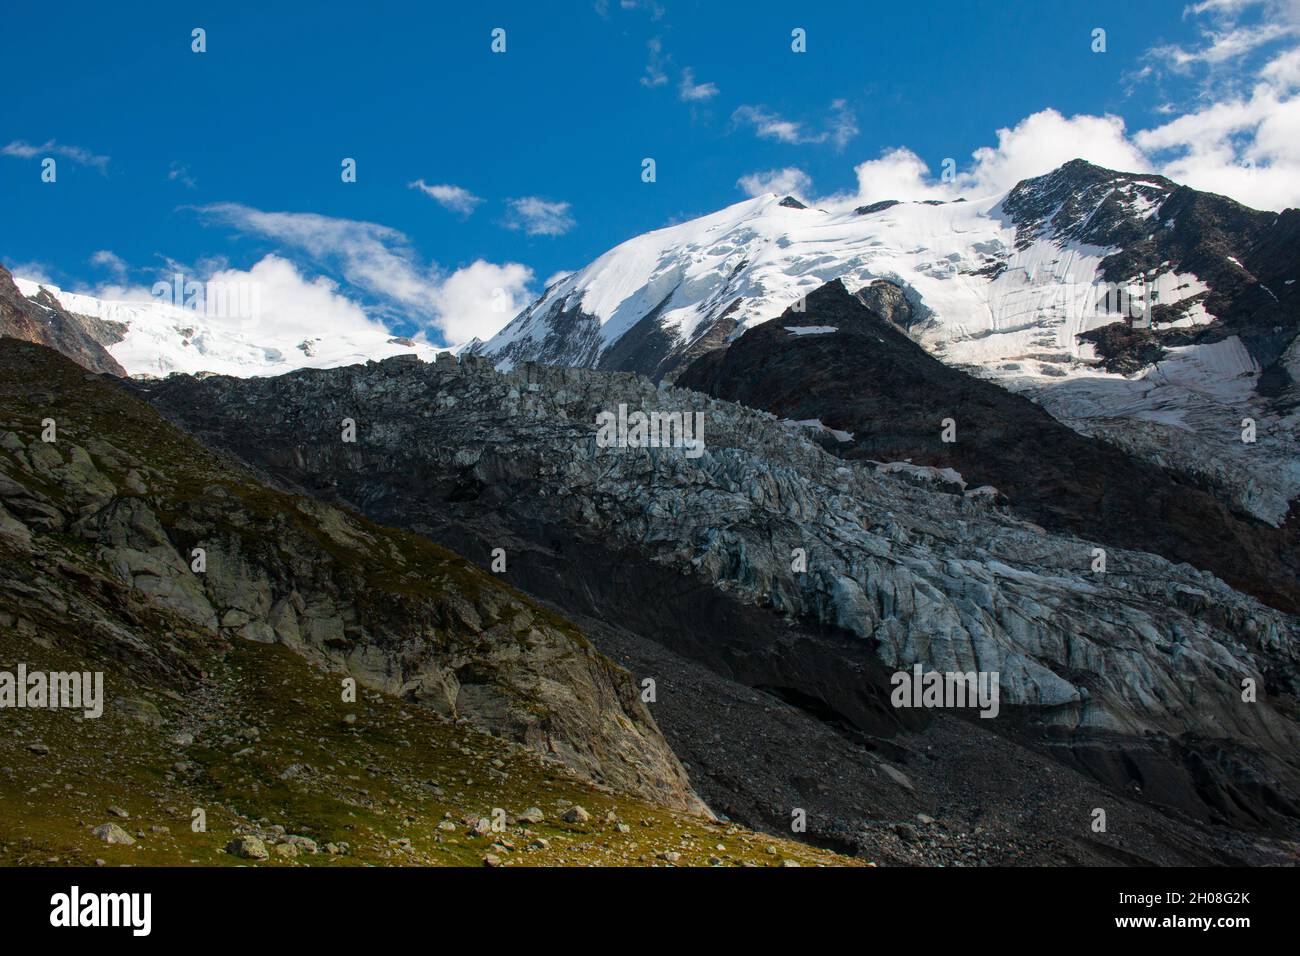 The view of a glacier de Bionnassay from the hiking trail to Nid d'Aigle, Massif du Mont Blanc, French Alps, September Stock Photo